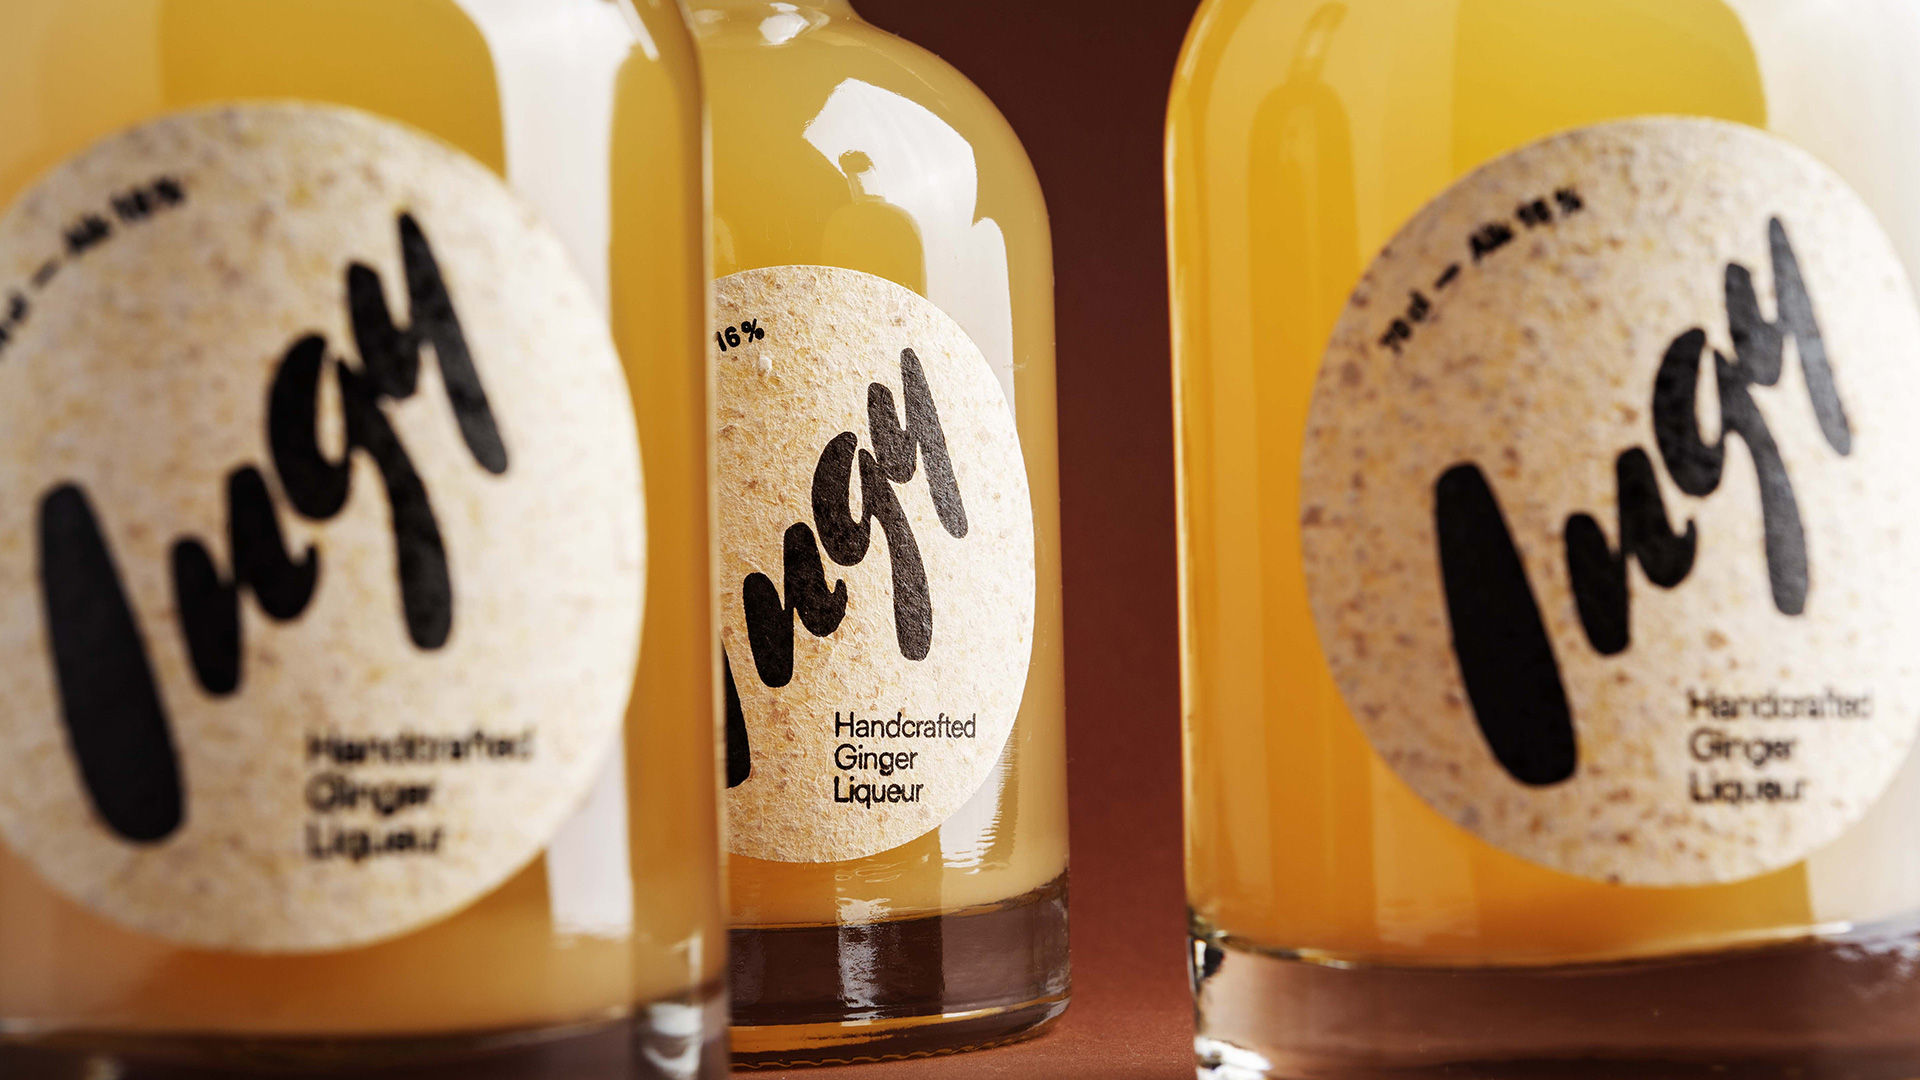 IGY_Branding_Products_Ginger-bottle